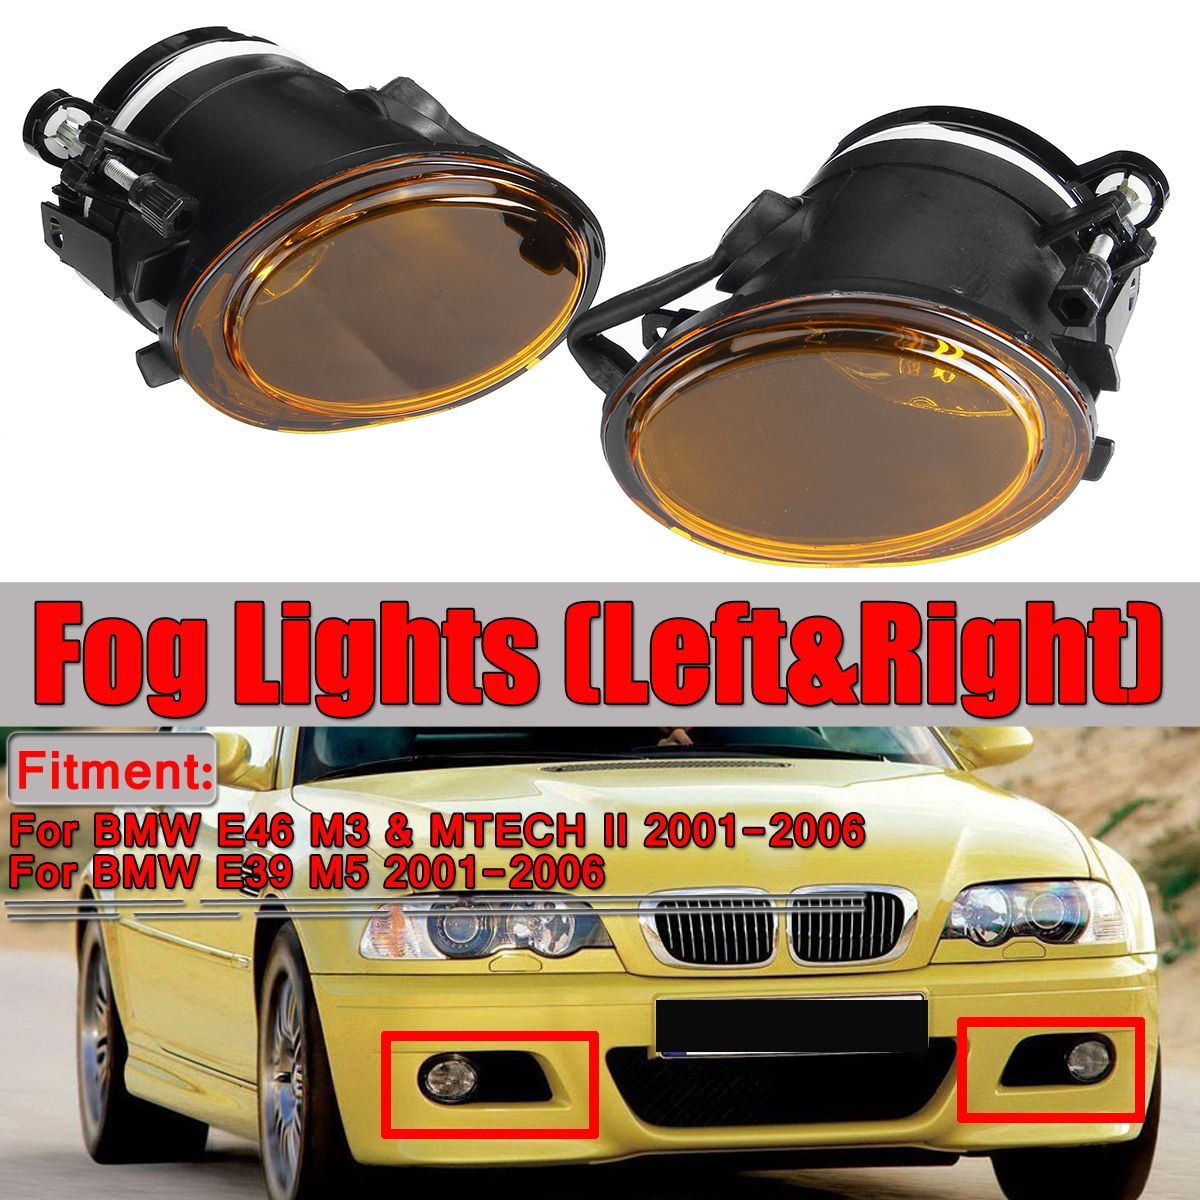 Car-Front-Fog-Lights-Yellow-Replacement-for-BMW-E46-M3-MTECH-II-E39-M5-2001-2006-63177894017-6317789-1474115